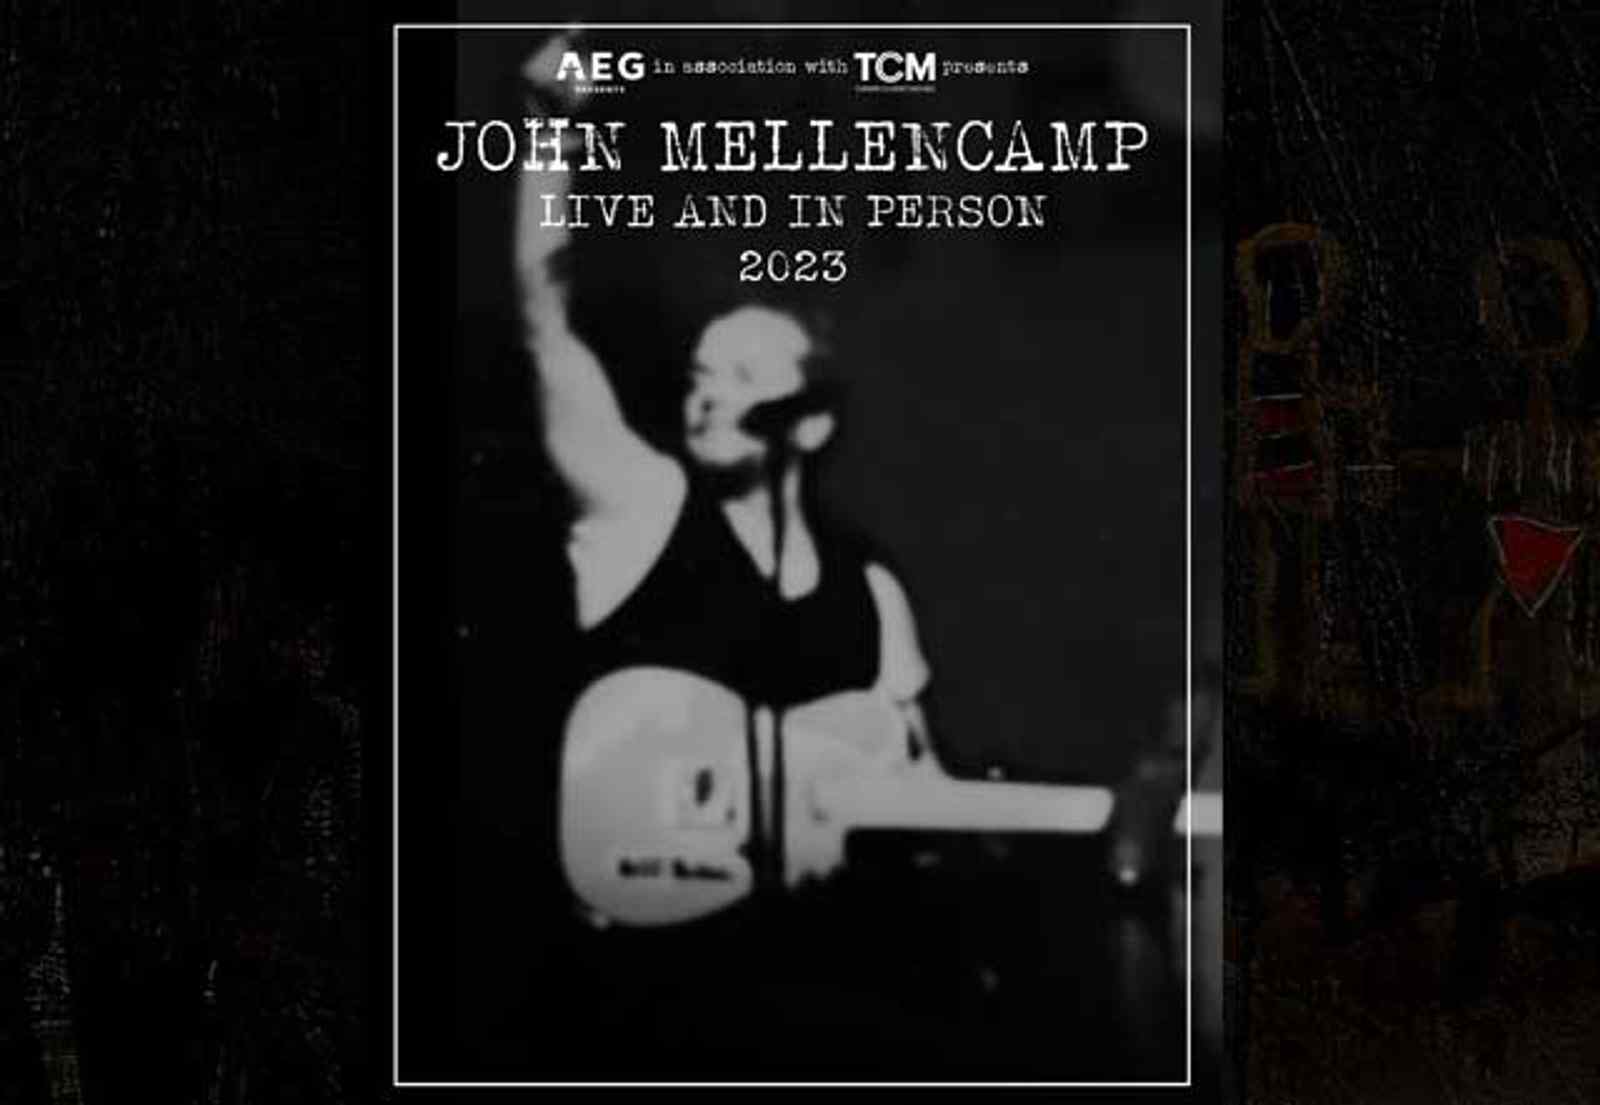 John Mellencamp Live and In Person 2023 Tour - Third Chicago Show Announced